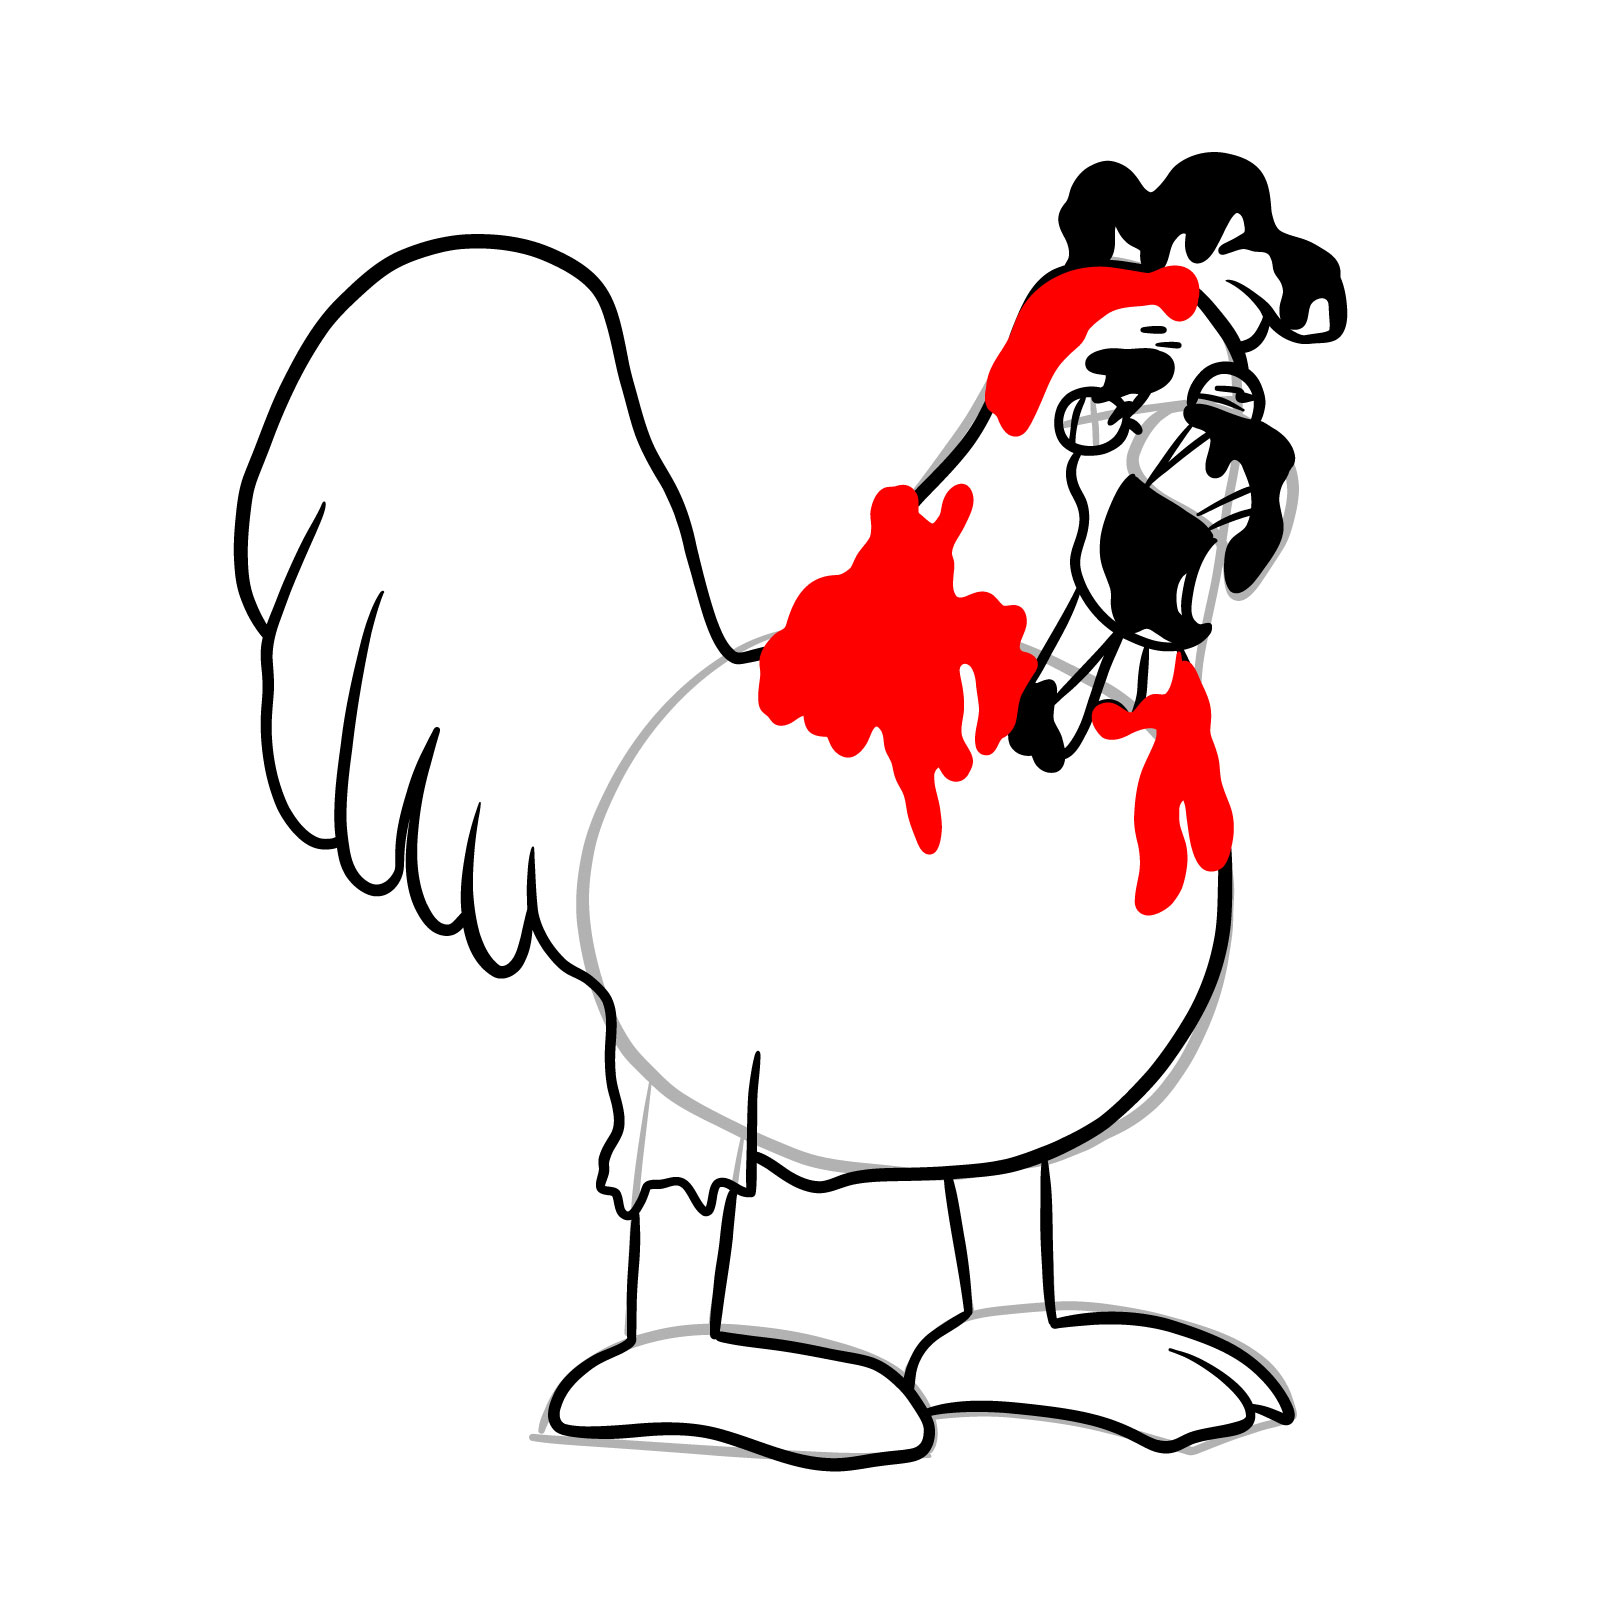 How to draw Corrupted Ernie the Chicken - step 20